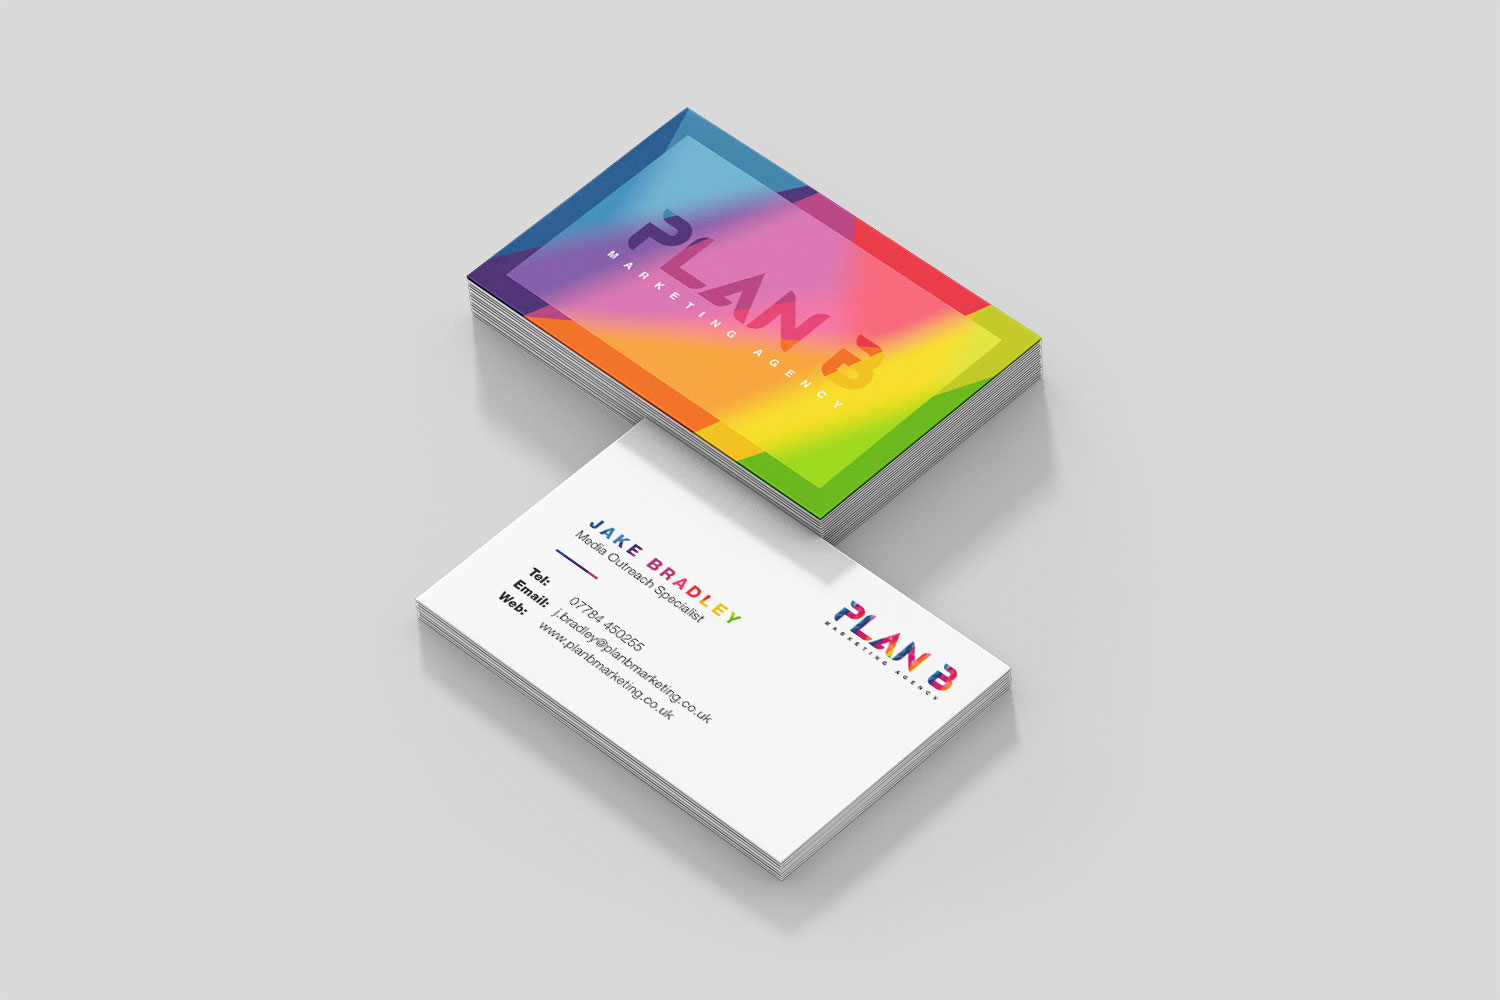 Impress your clients with our high quality business cards.